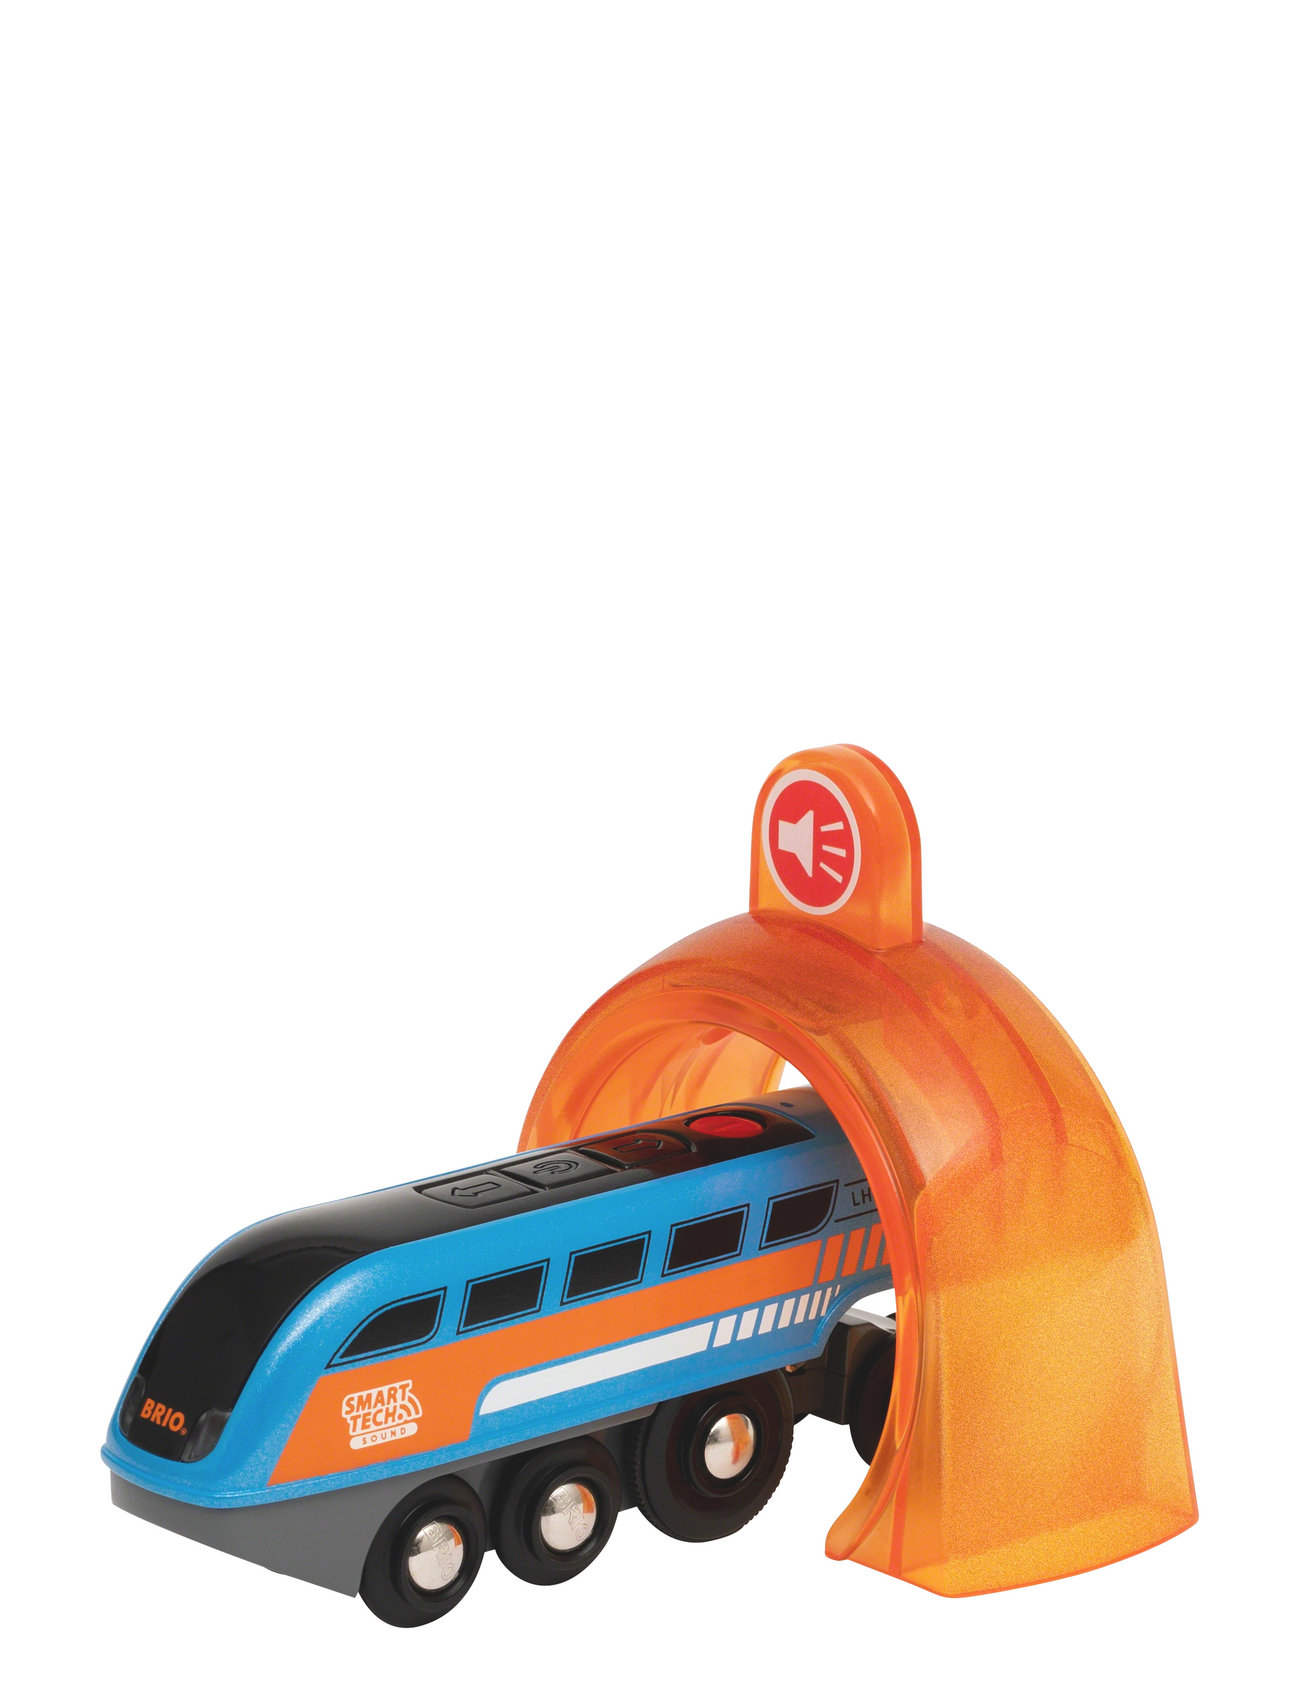 Brio 33971 Smart Tech Sound Lokomotiv Med Lydoptager Toys Toy Cars & Vehicles Toy Vehicles Train Accessories Multi/patterned BRIO